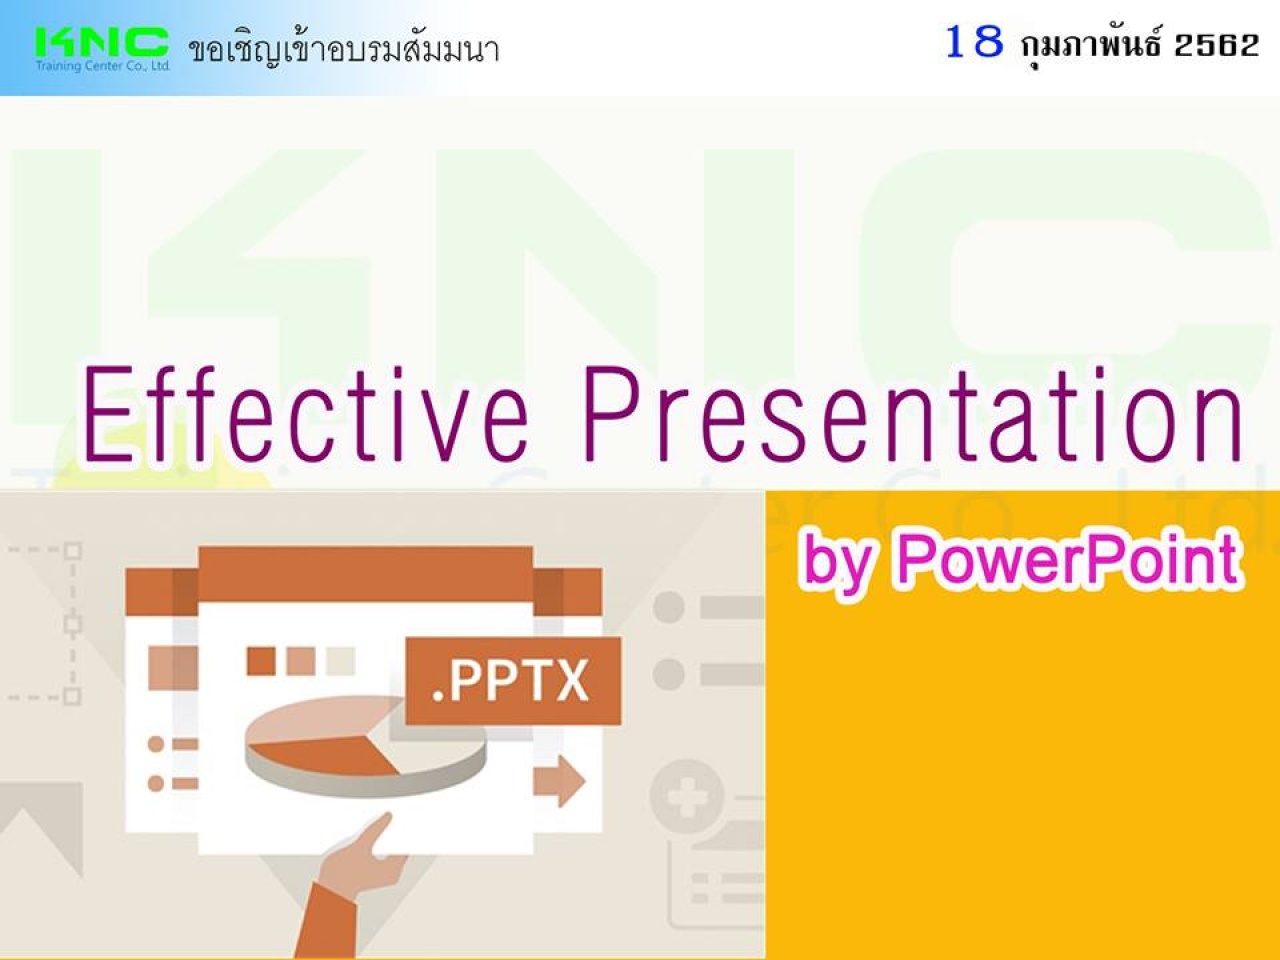 Effective Presentation by PowerPoint